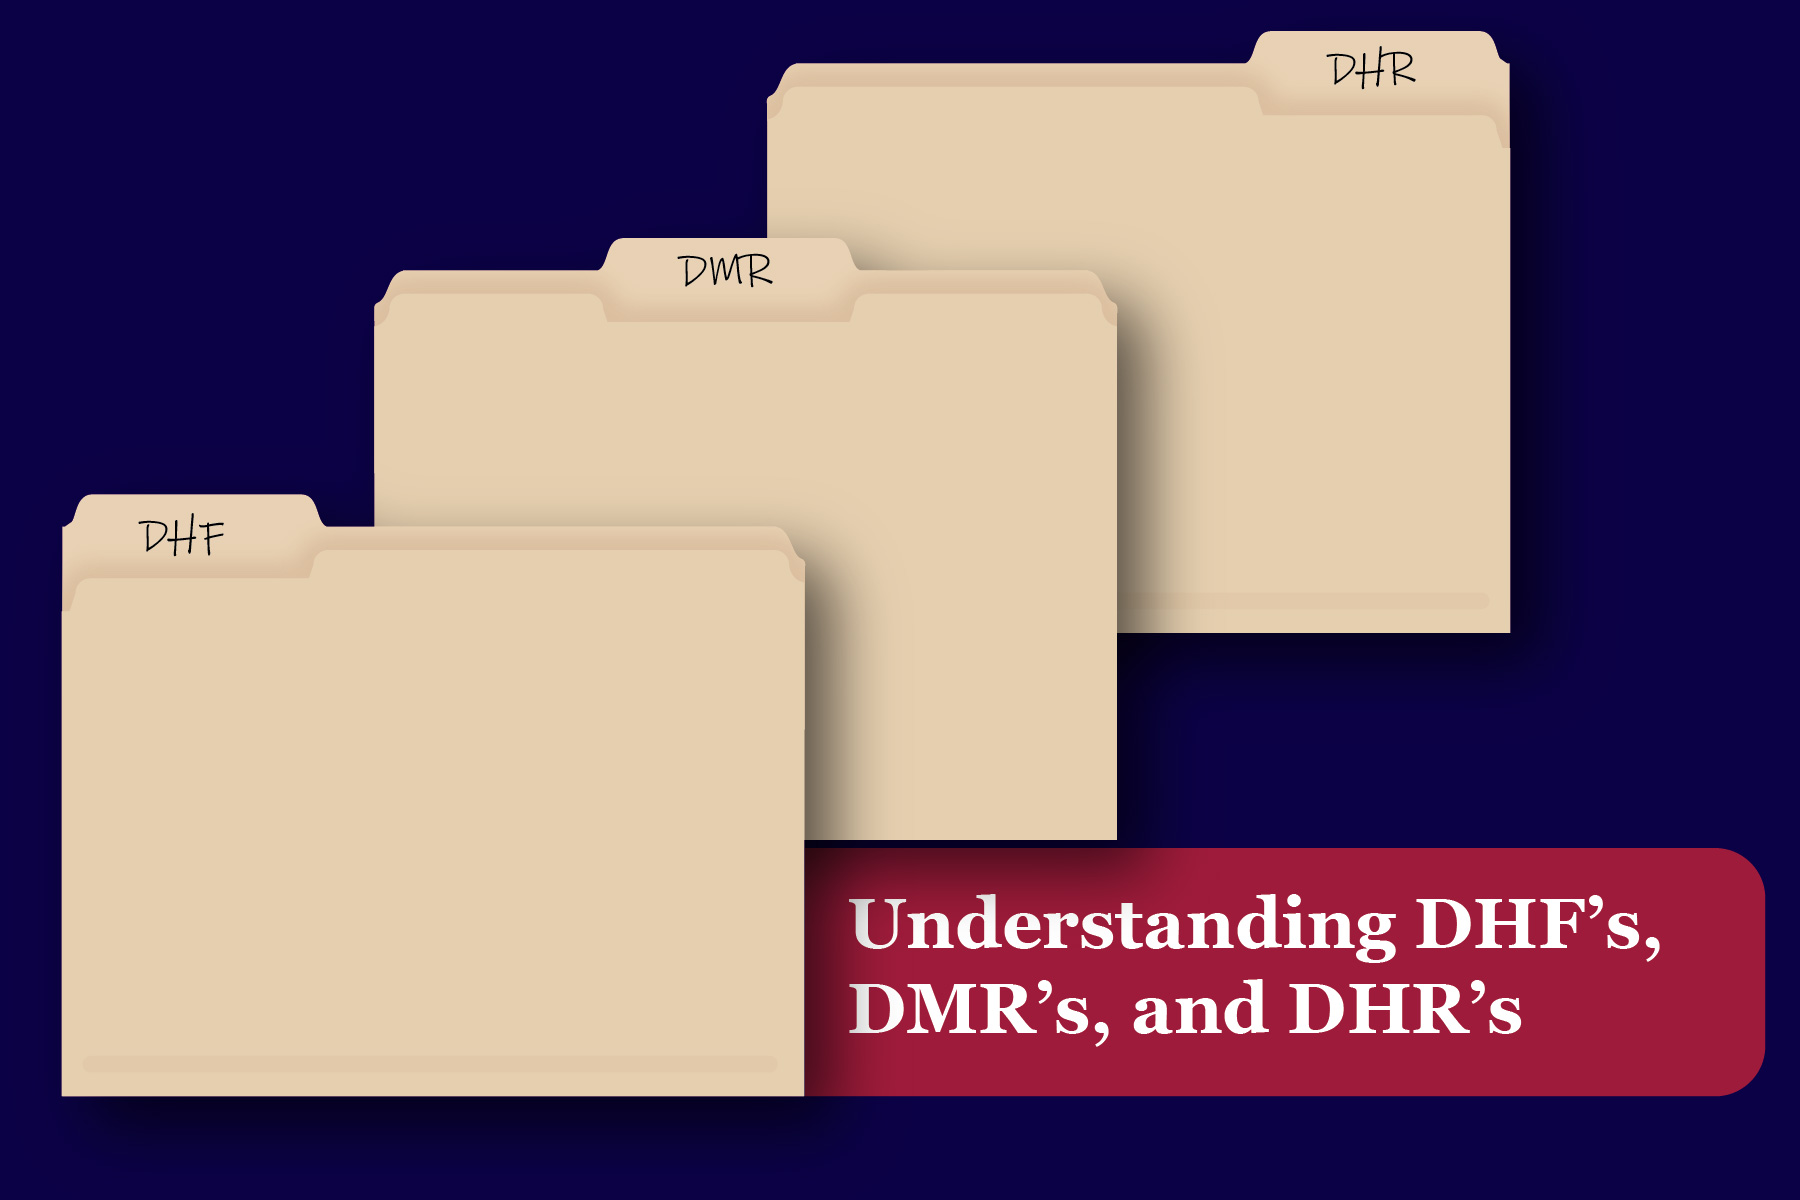 Understanding DHF’s, DMR’s, and DHR’s